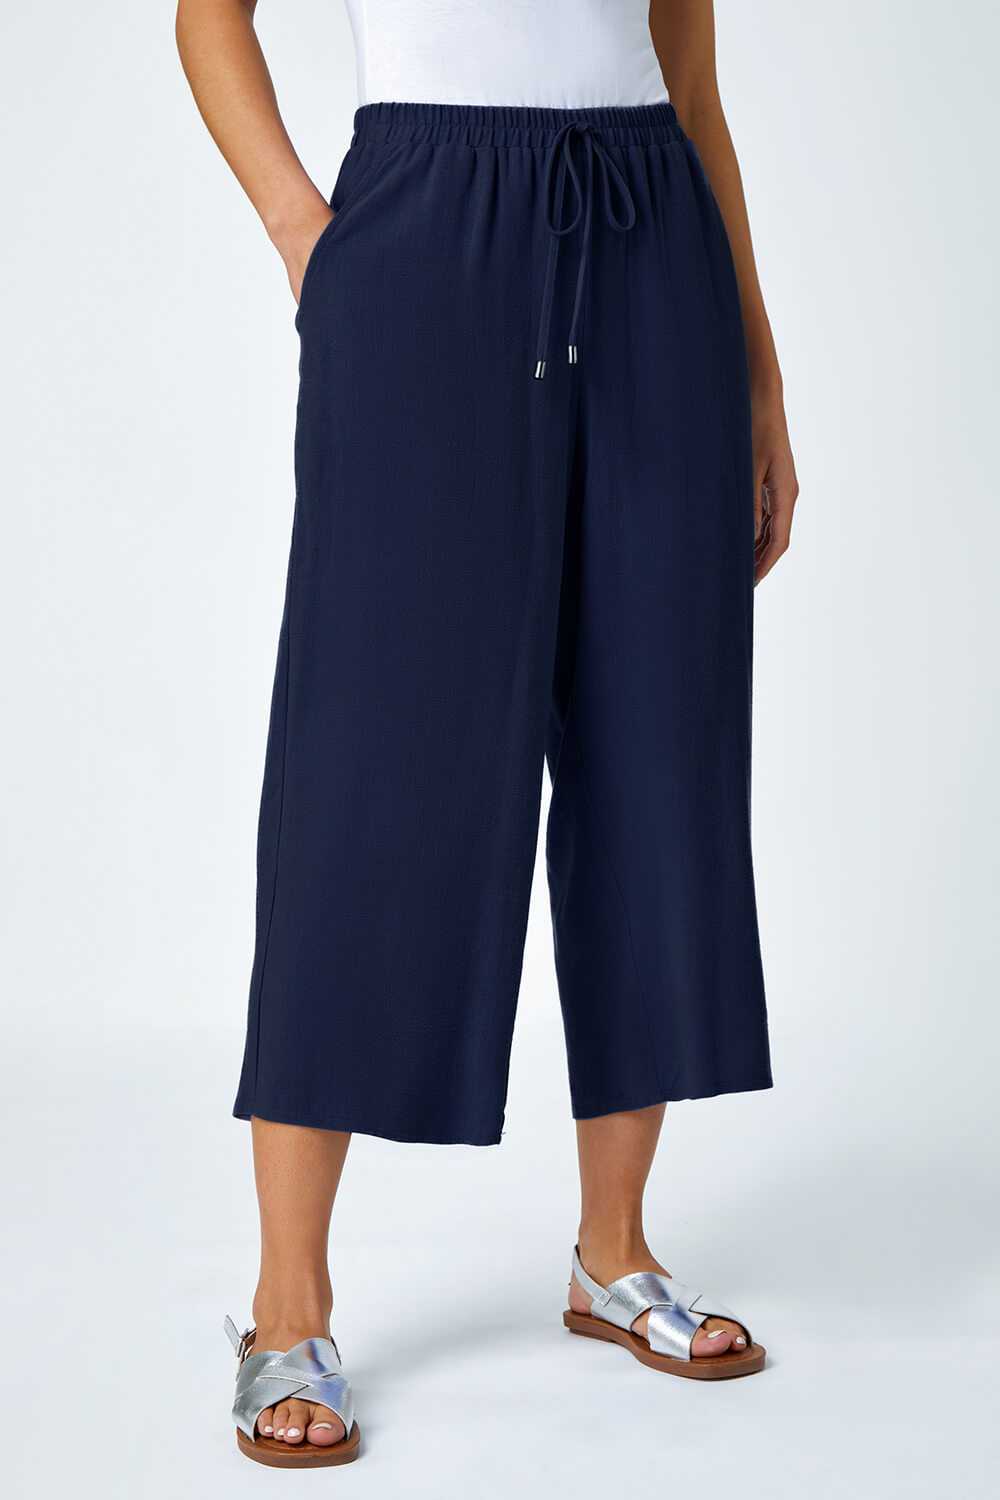  Petite Linen Mix Wide Cropped Trousers, Image 4 of 5